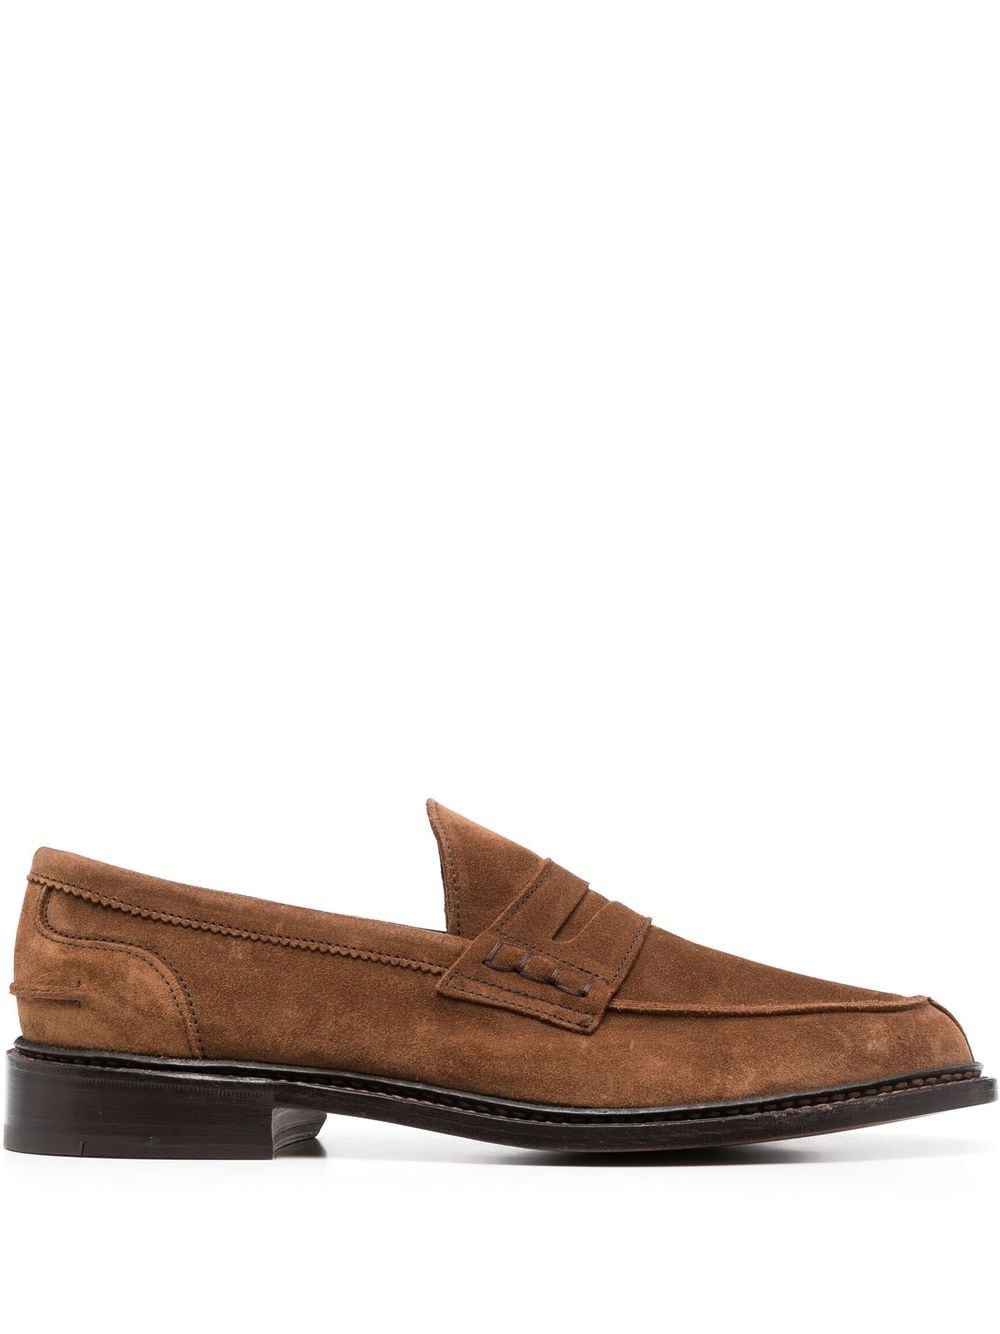 Tricker's suede penny loafers